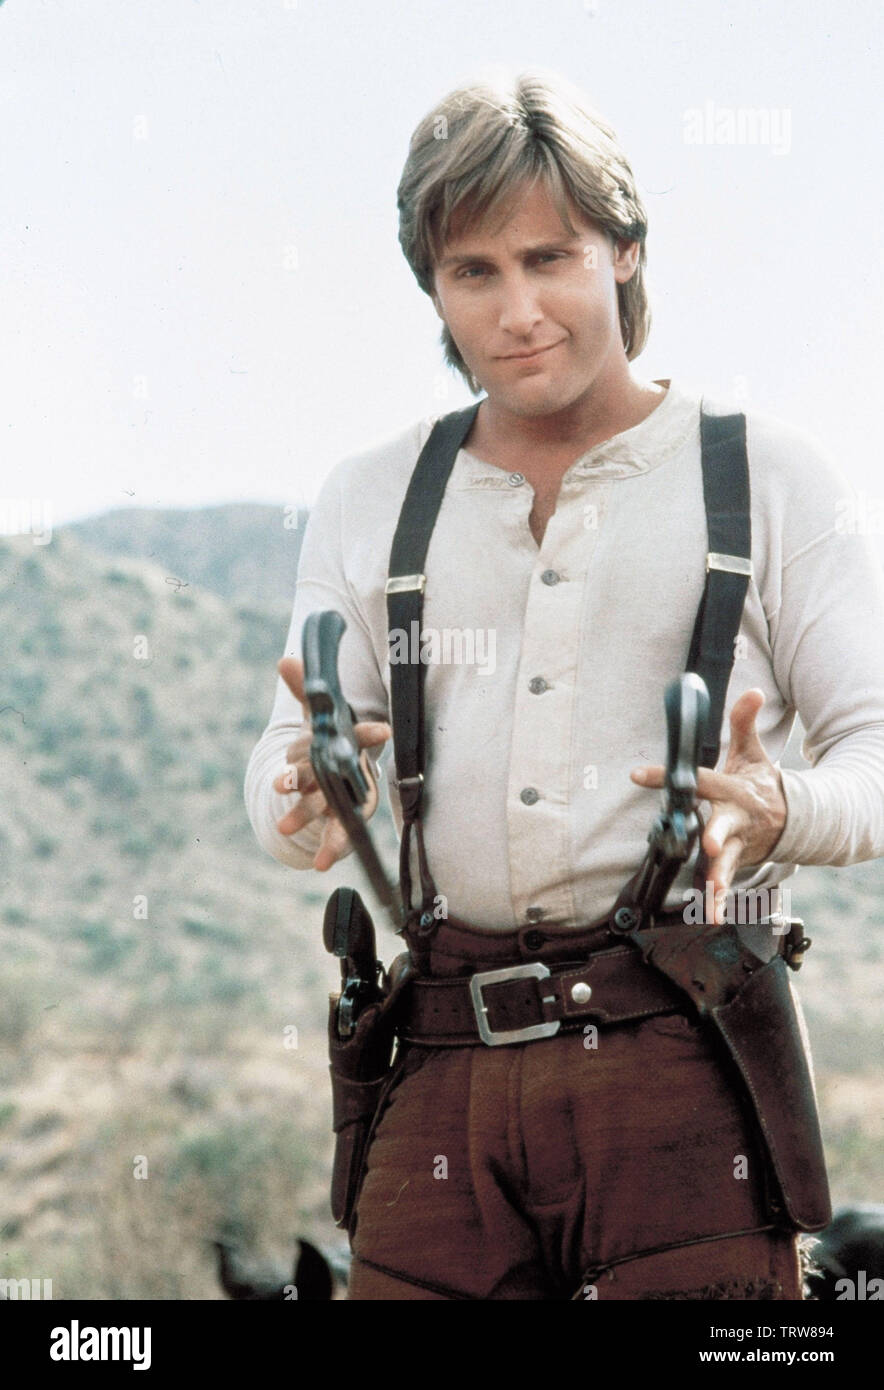 EMILIO ESTEVEZ in YOUNG GUNS II (1990). Copyright: Editorial use only. No merchandising or book covers. This is a publicly distributed handout. Access rights only, no license of copyright provided. Only to be reproduced in conjunction with promotion of this film. Credit: 20TH CENTURY FOX / GLASS, BEN / Album Stock Photo